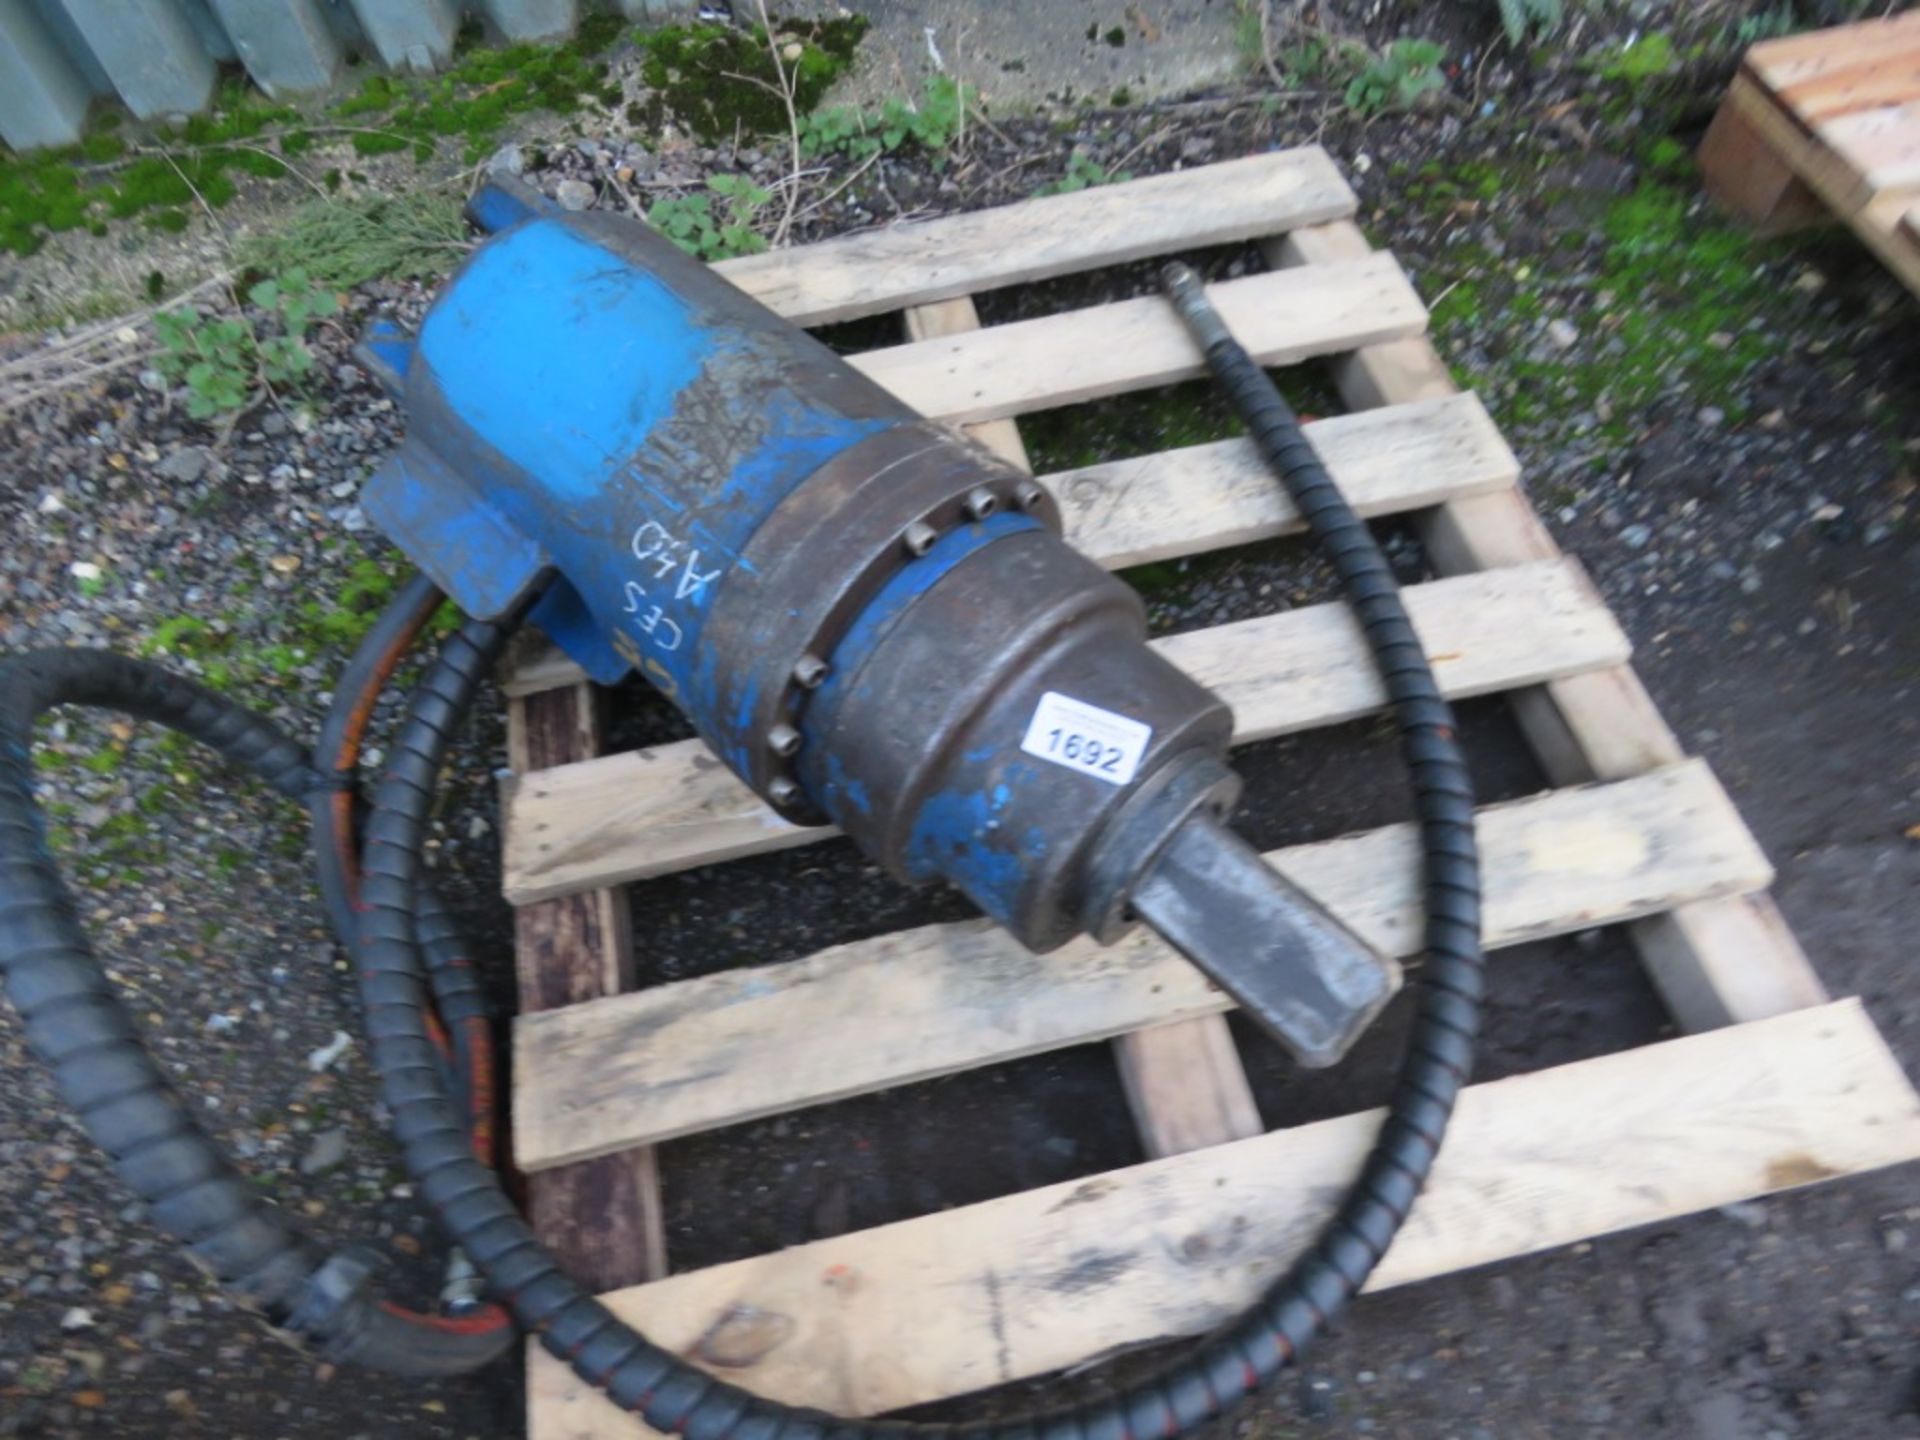 LARGE SIZED EXCAVATOR MOUNTED AUGER DRIVE HEAD. 75MM SQUARE DRIVE HEAD, 45MM TOP PIN SIZE APPROX.